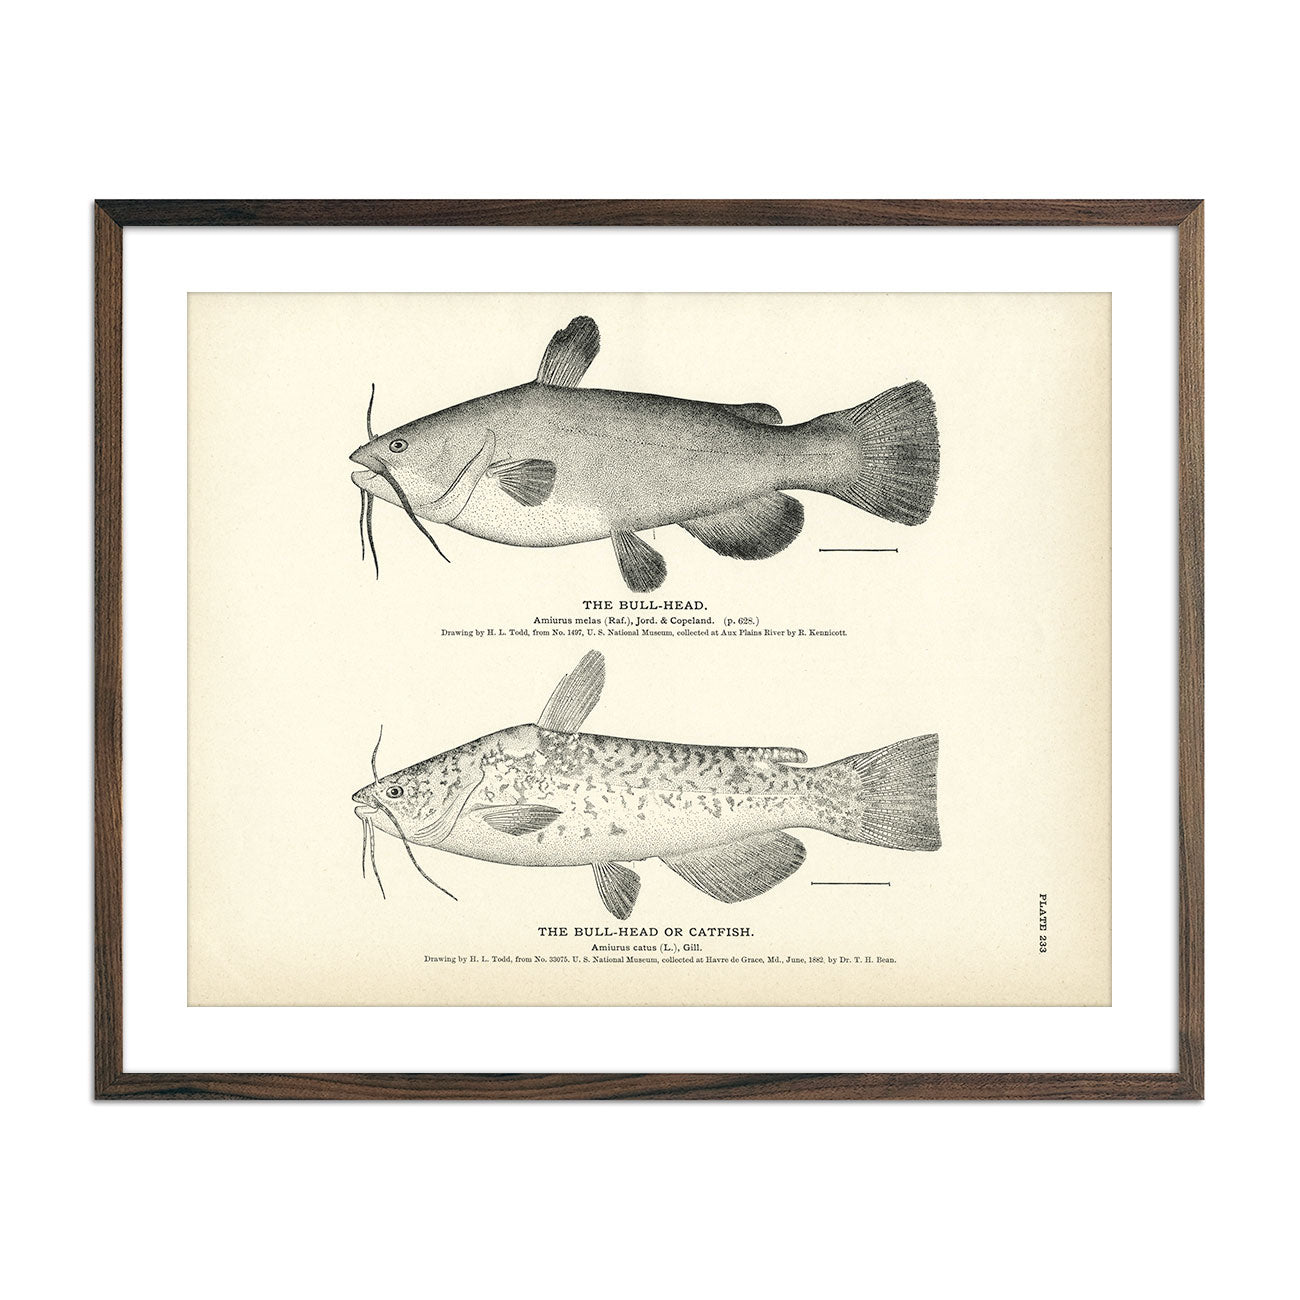 Common Catfish (Wolf-Fish) and Spotted Catfish - 1884 Print